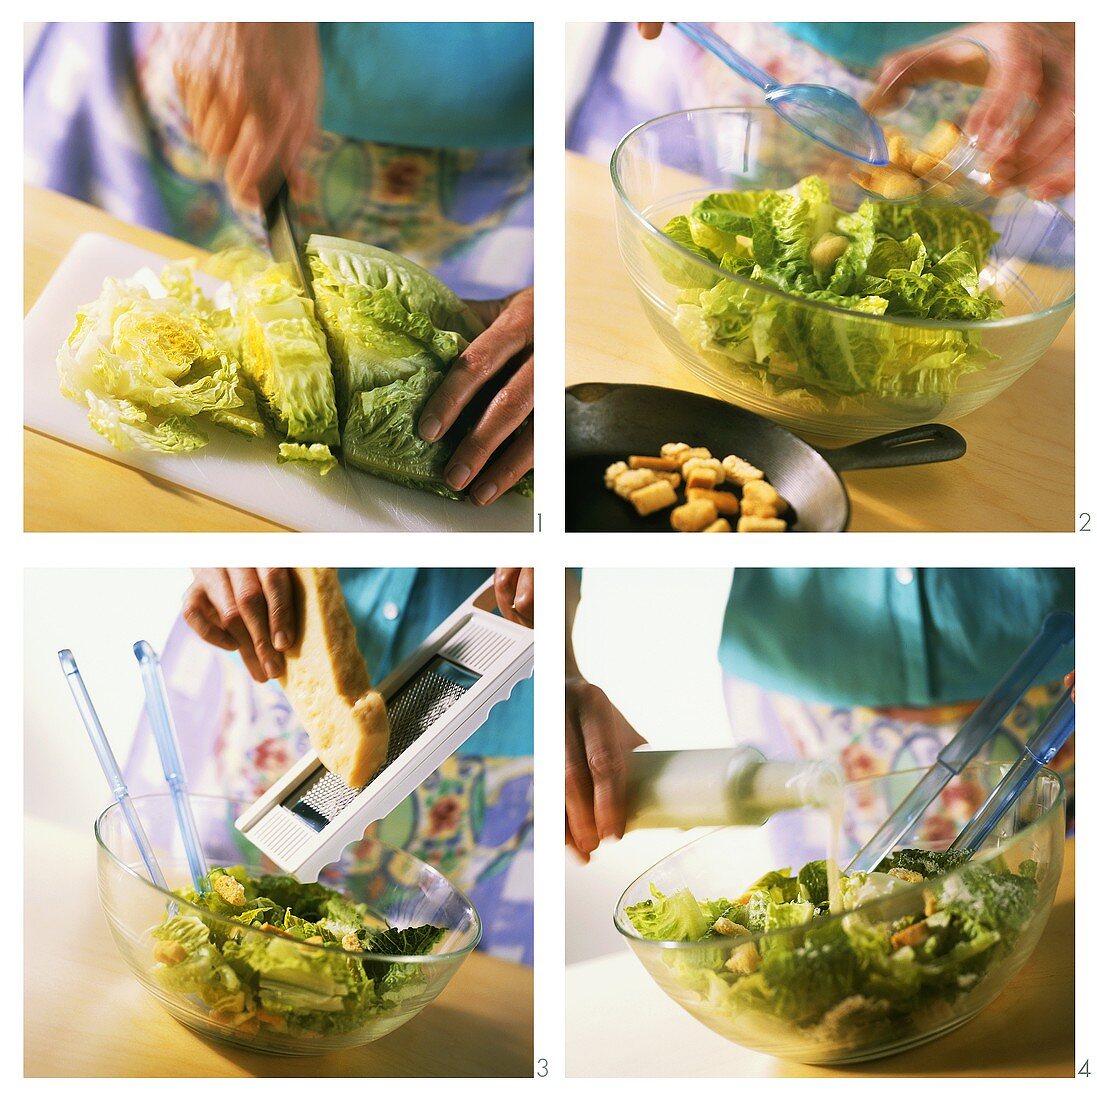 Making Caesar salad with croutons